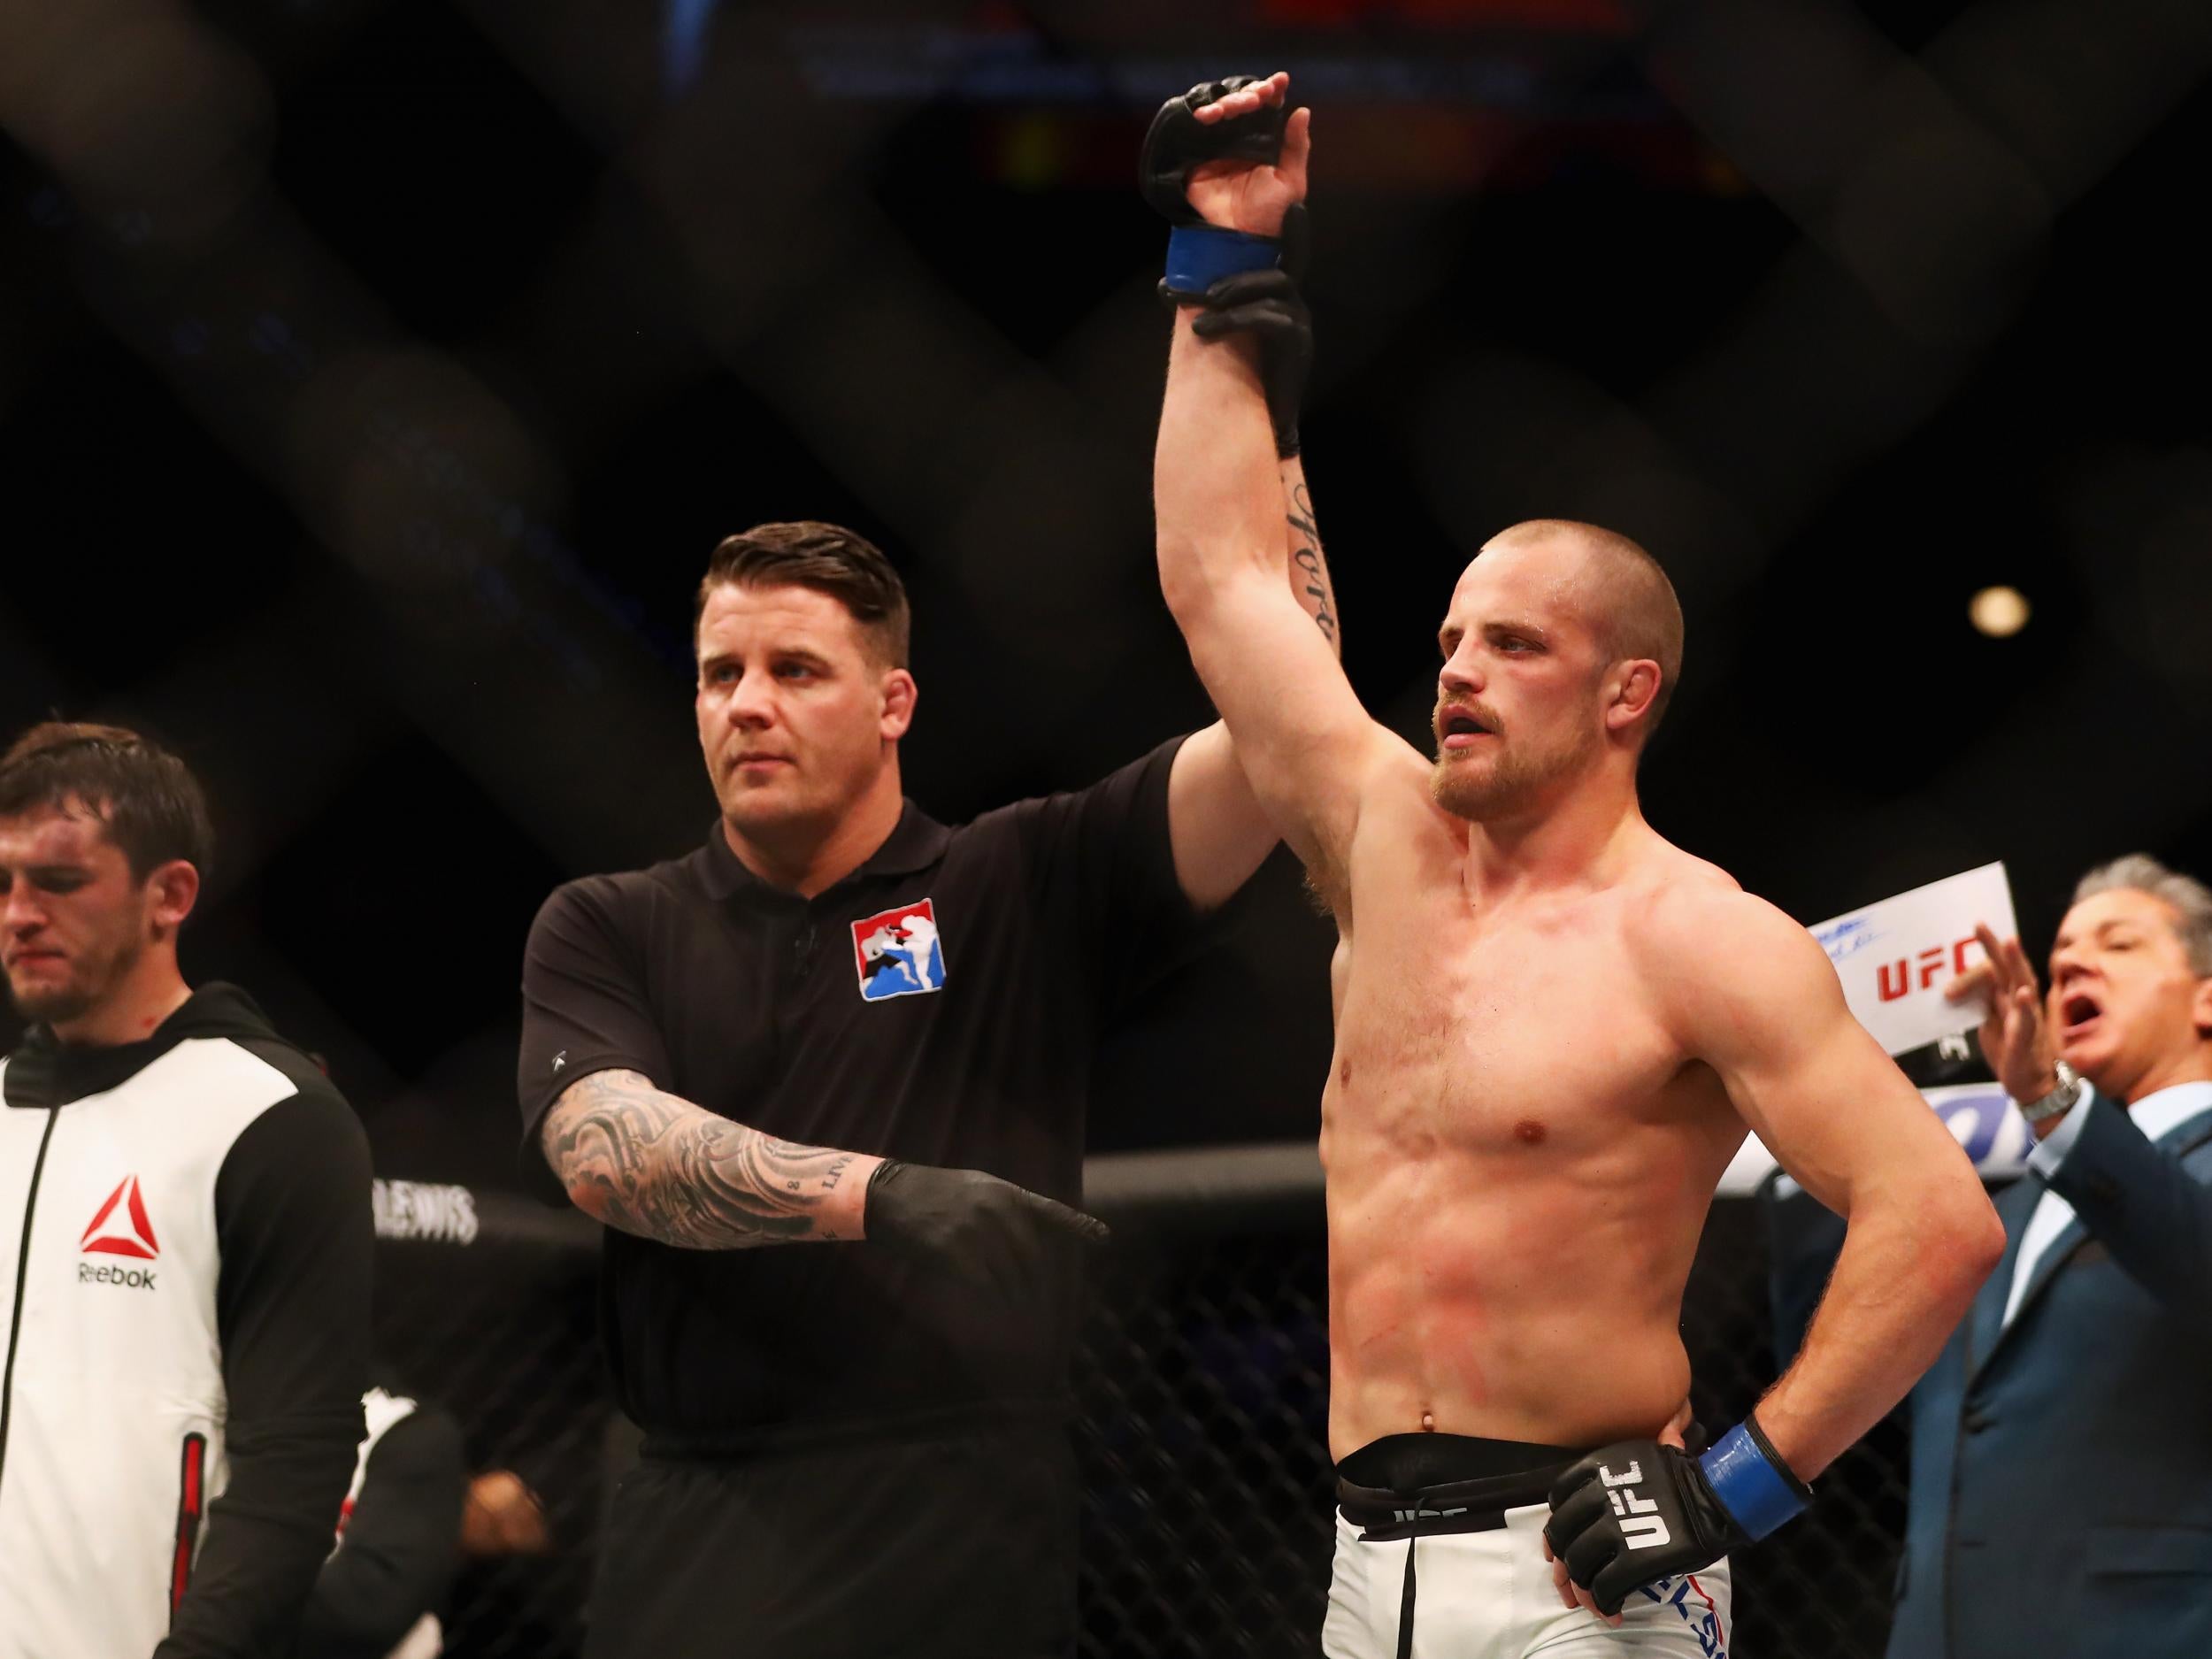 Gunnar Nelson is a slick submission artist